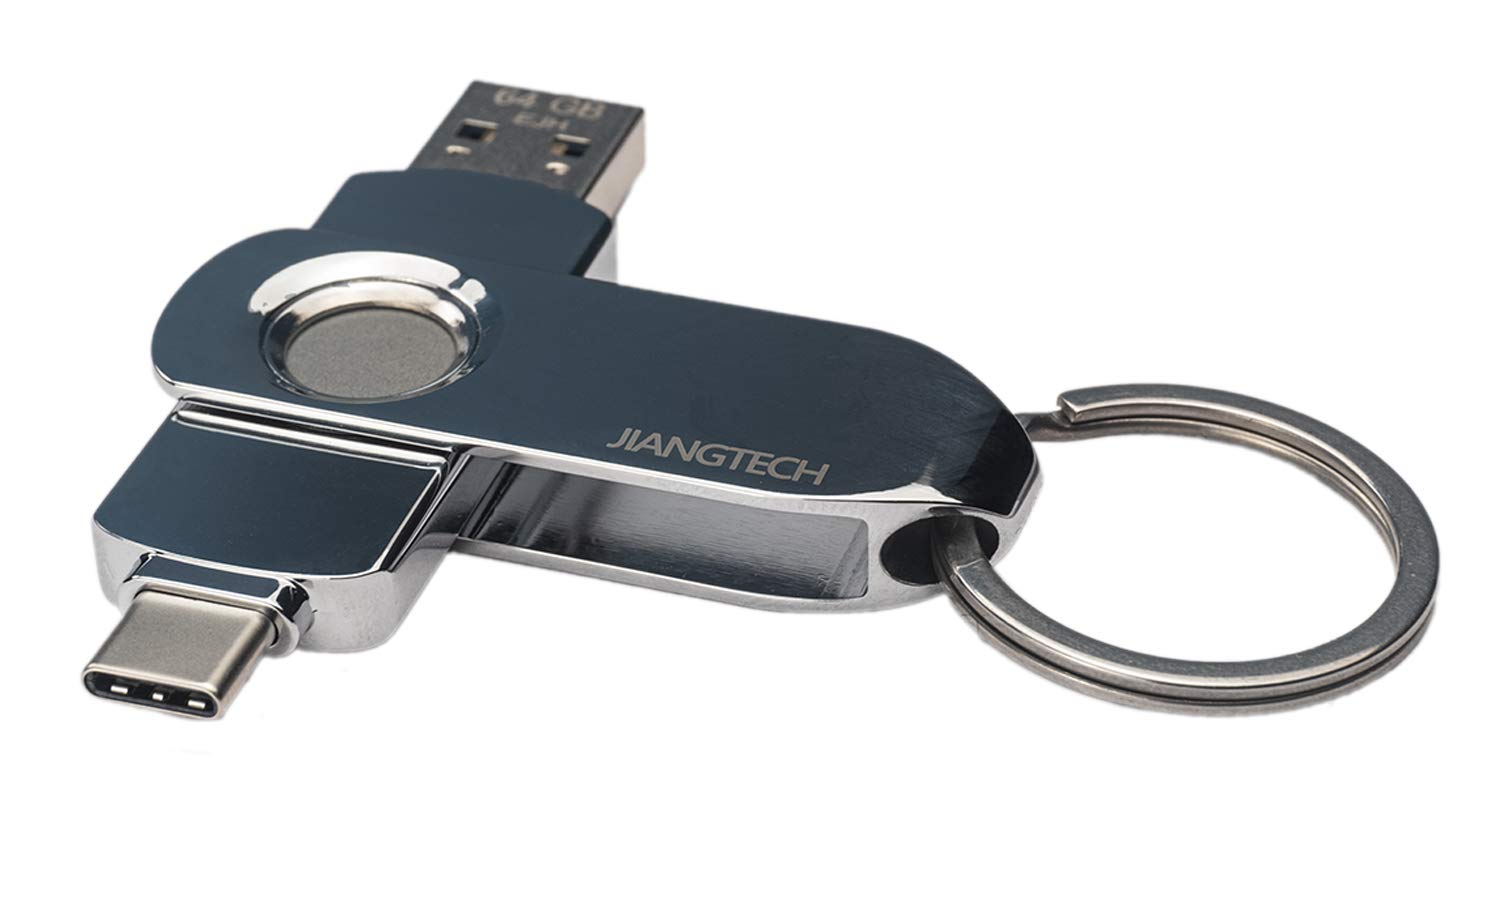 JIANGTECH USB Drive for PC and Android, Enctypted by Fingerprint, Support USB 3.0 (128GB)